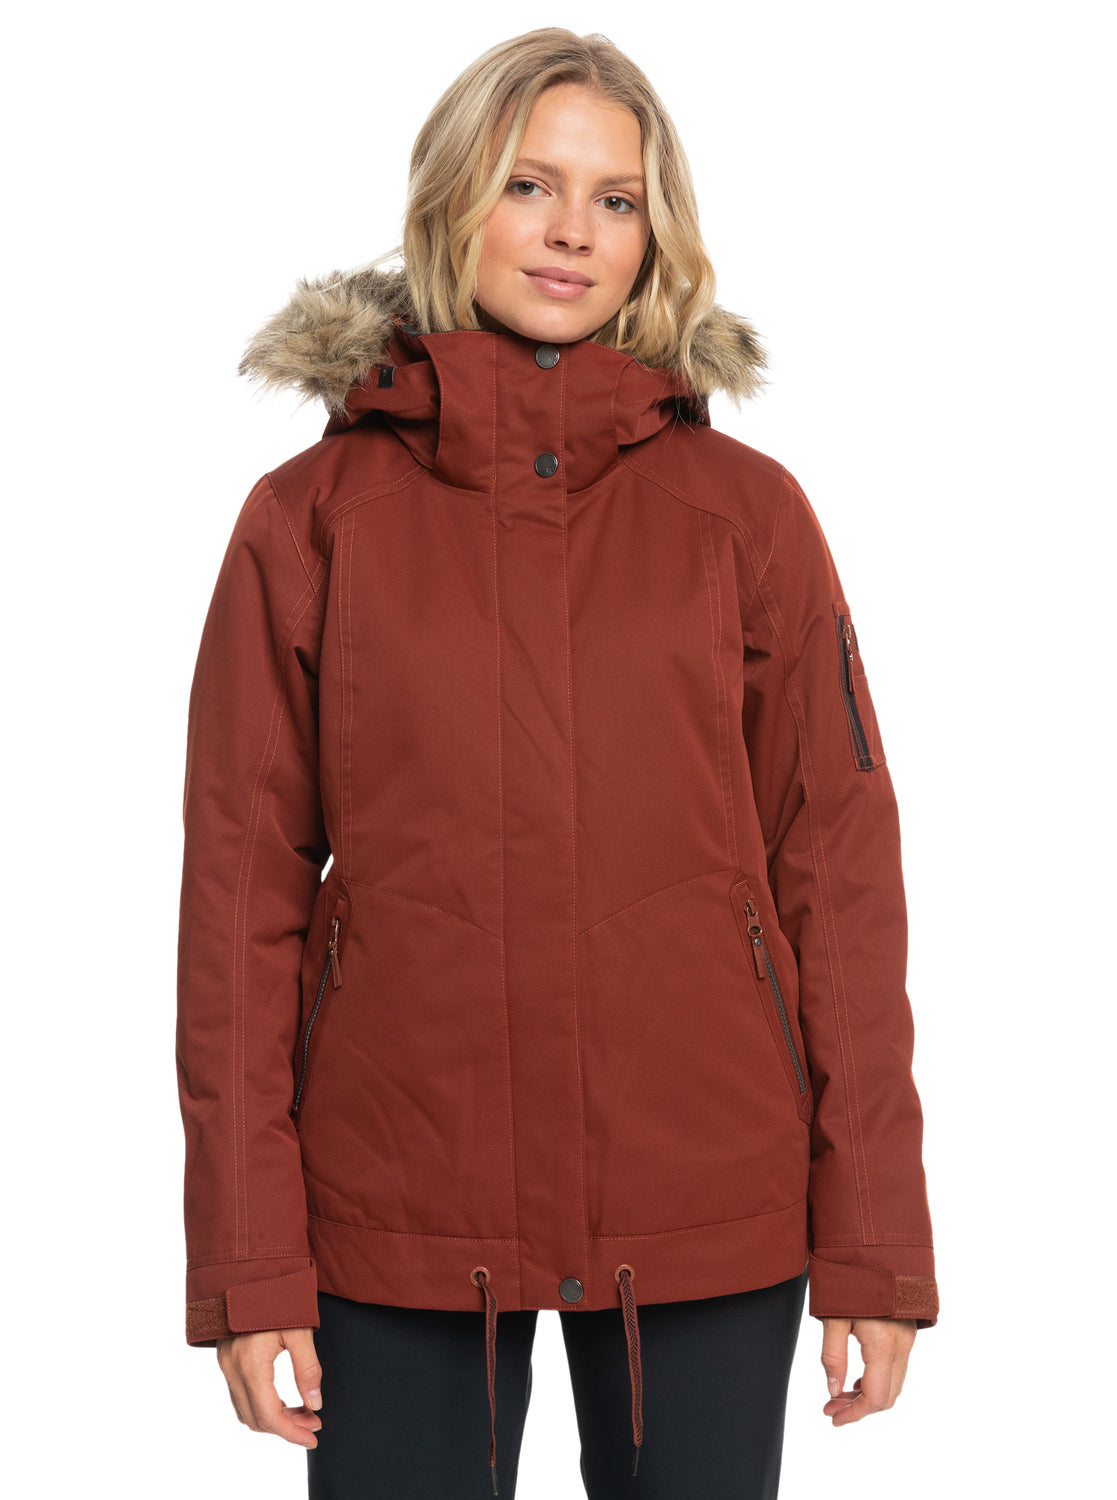 Women – Tagged WINTER JACKETS – Ernie's Sports Experts